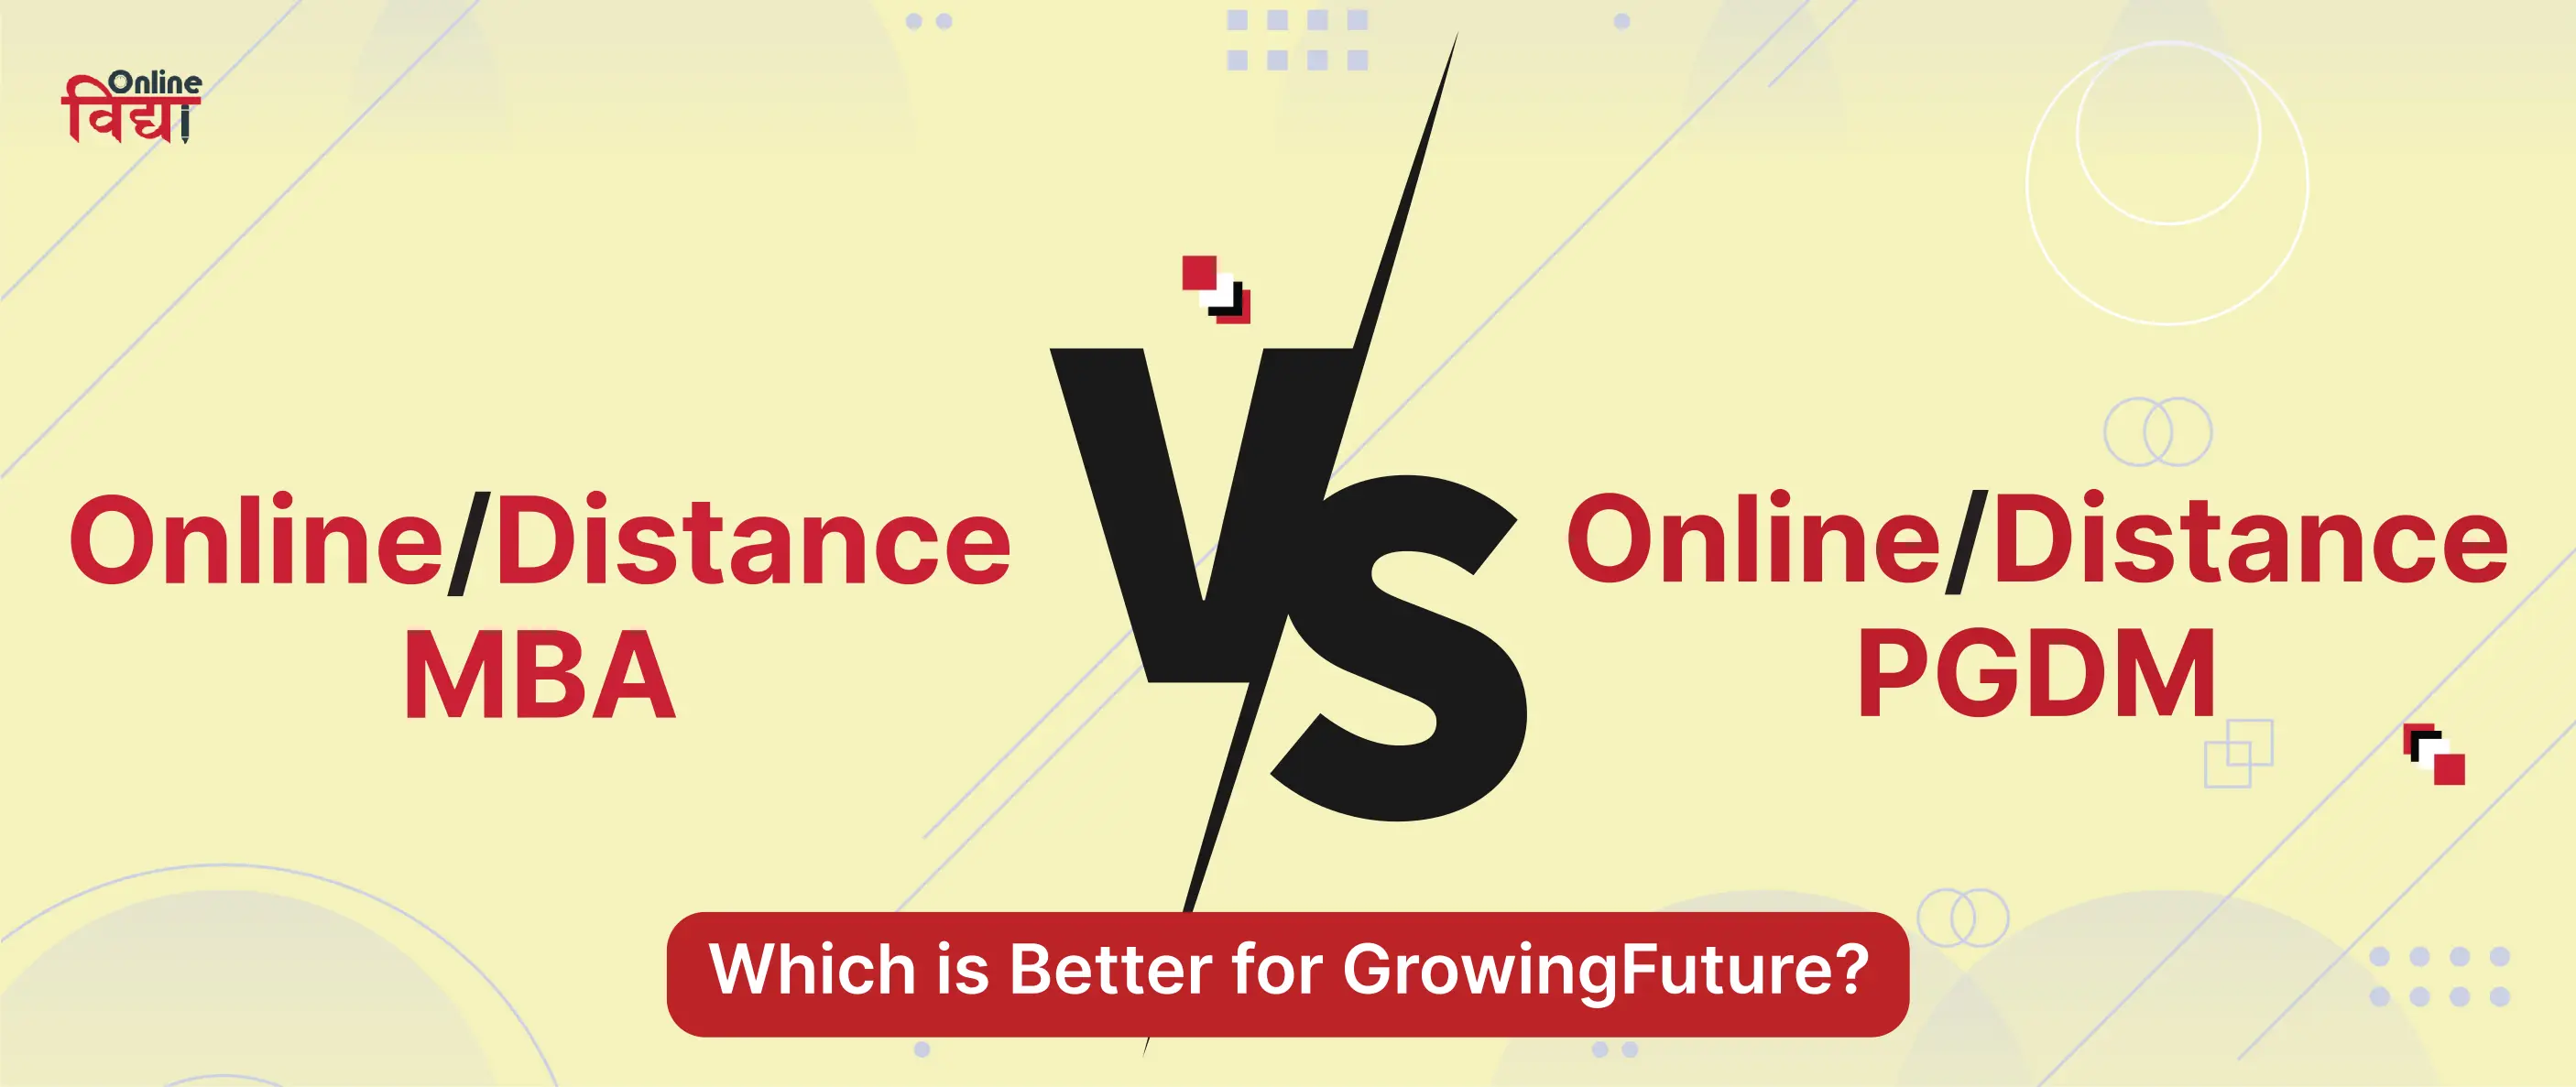 Online/ Distance MBA vs Online/Distance PGDM: Which is Better for Growing Future?